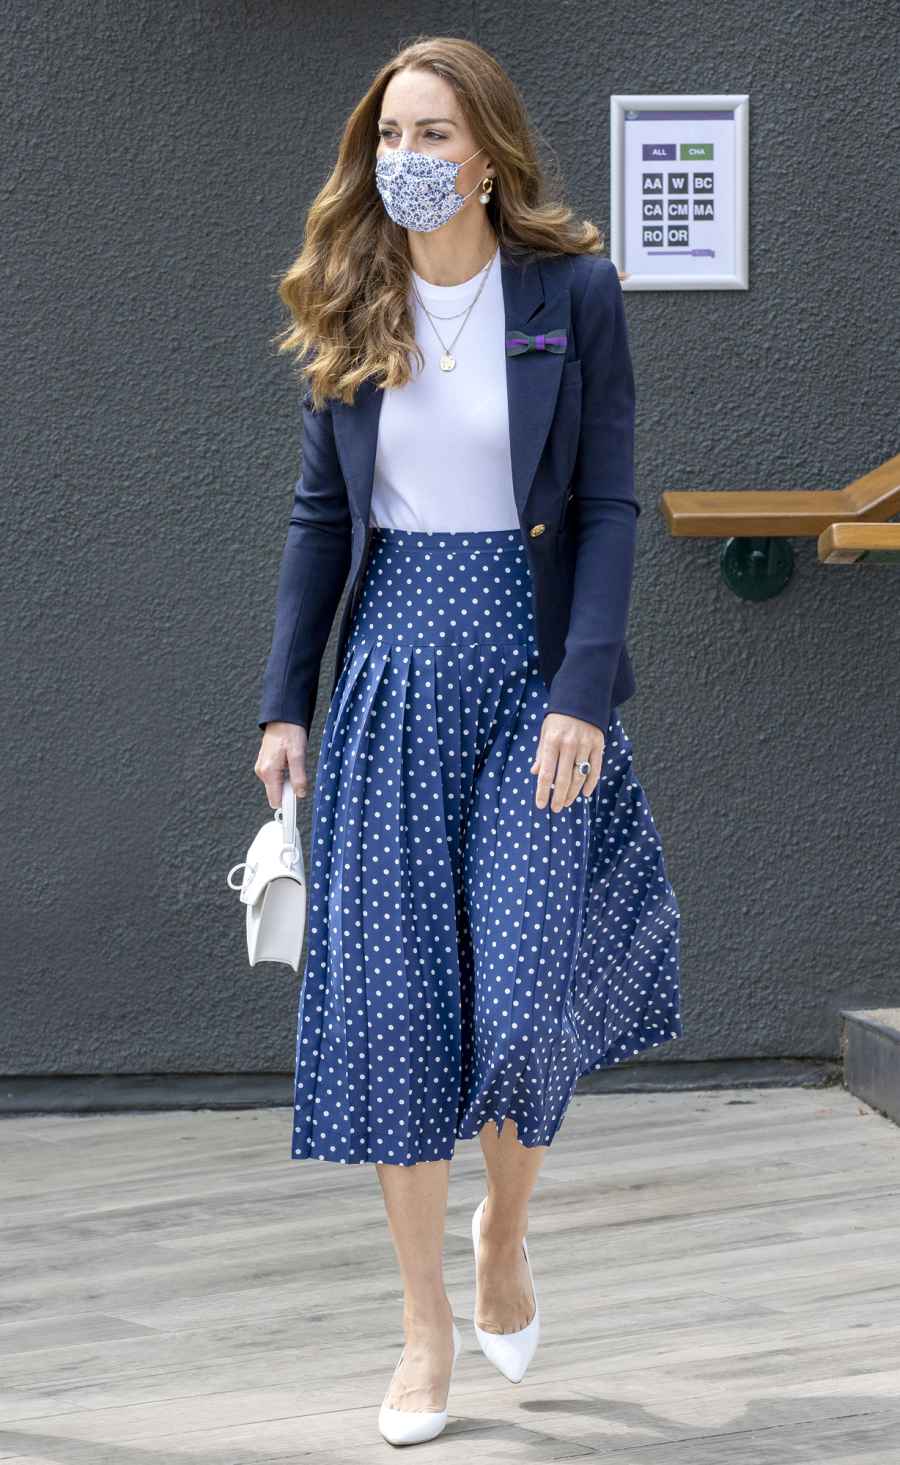 Kate Middleton turns heads in chic navy and white polka dot dress at  Wimbledon Men's final